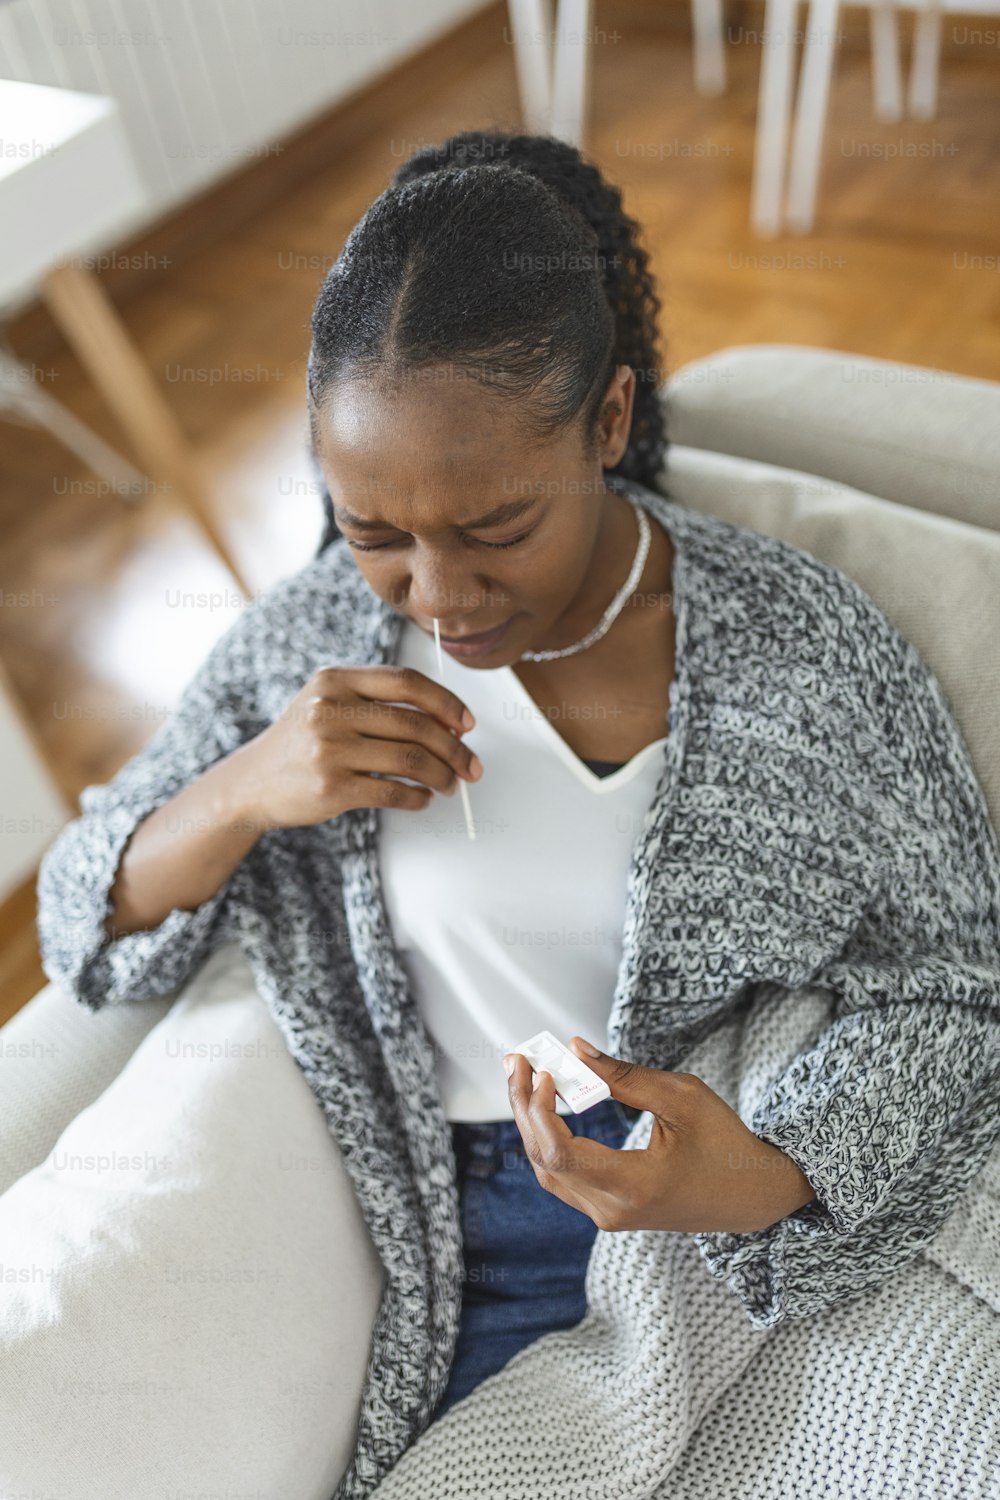 African-American woman using cotton swab while doing coronavirus PCR test at home. Woman using coronavirus rapid diagnostic test. Young woman at home using a nasal swab for COVID-19.